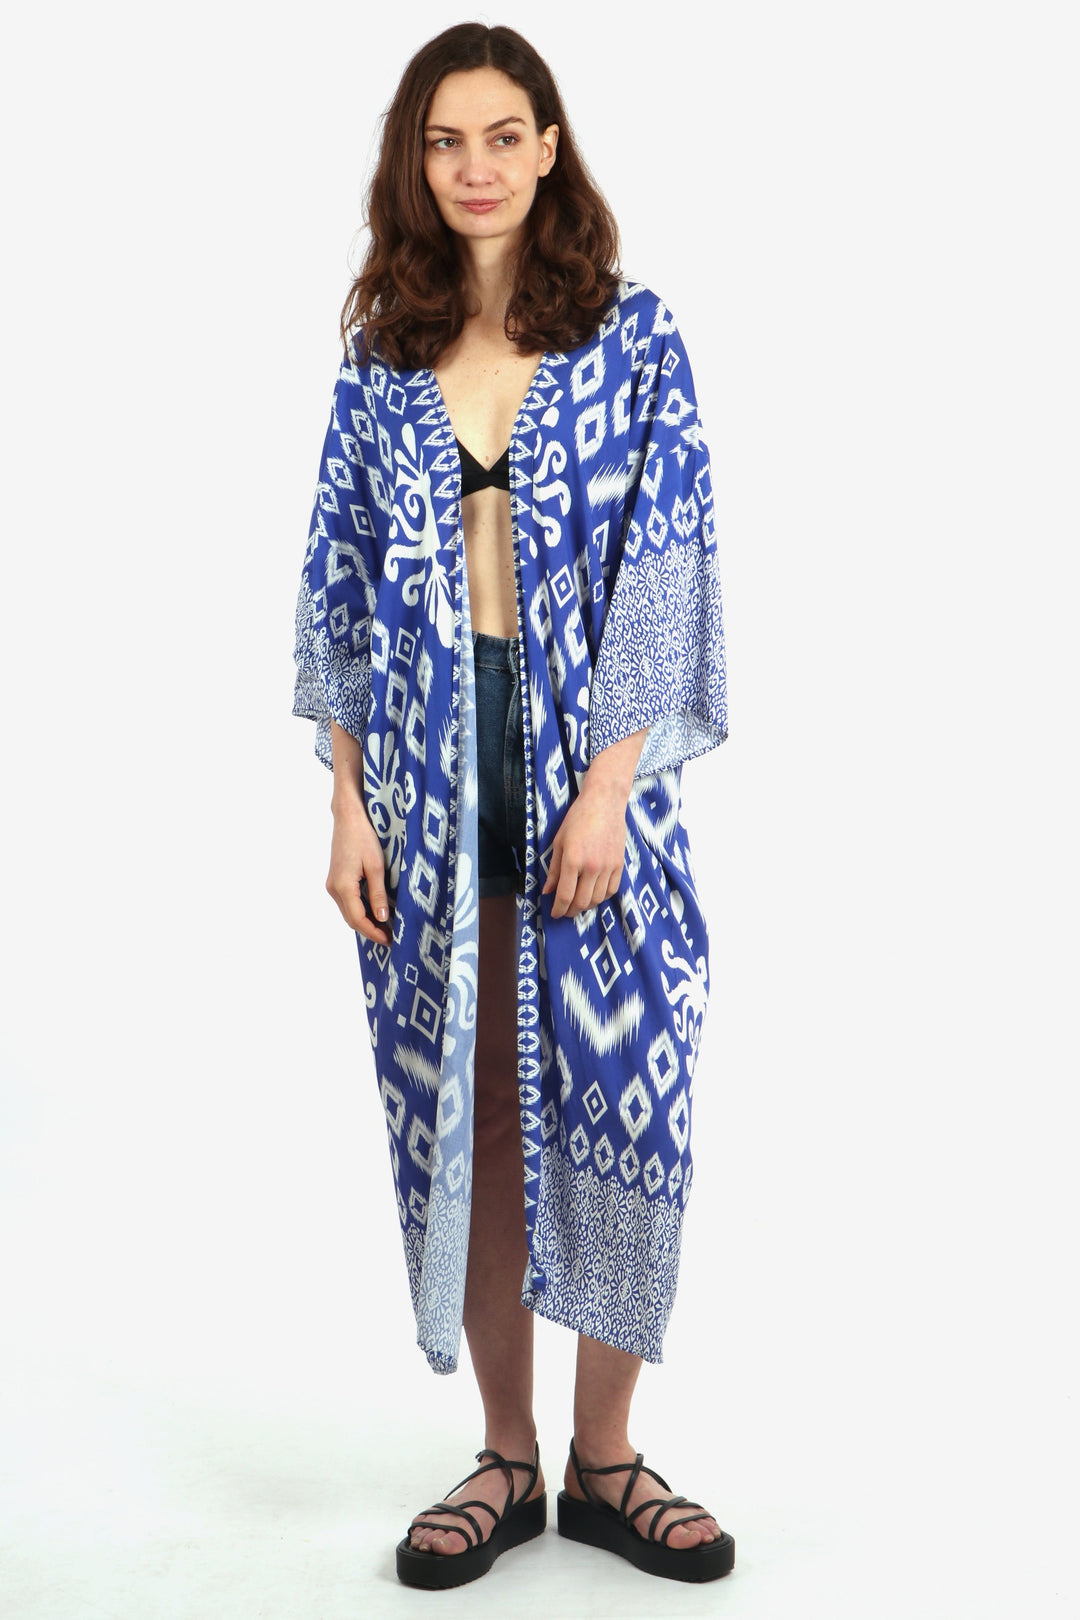 model wearing a long midi length blue and white ikat pattern kimono robe with 3/4 sleeves